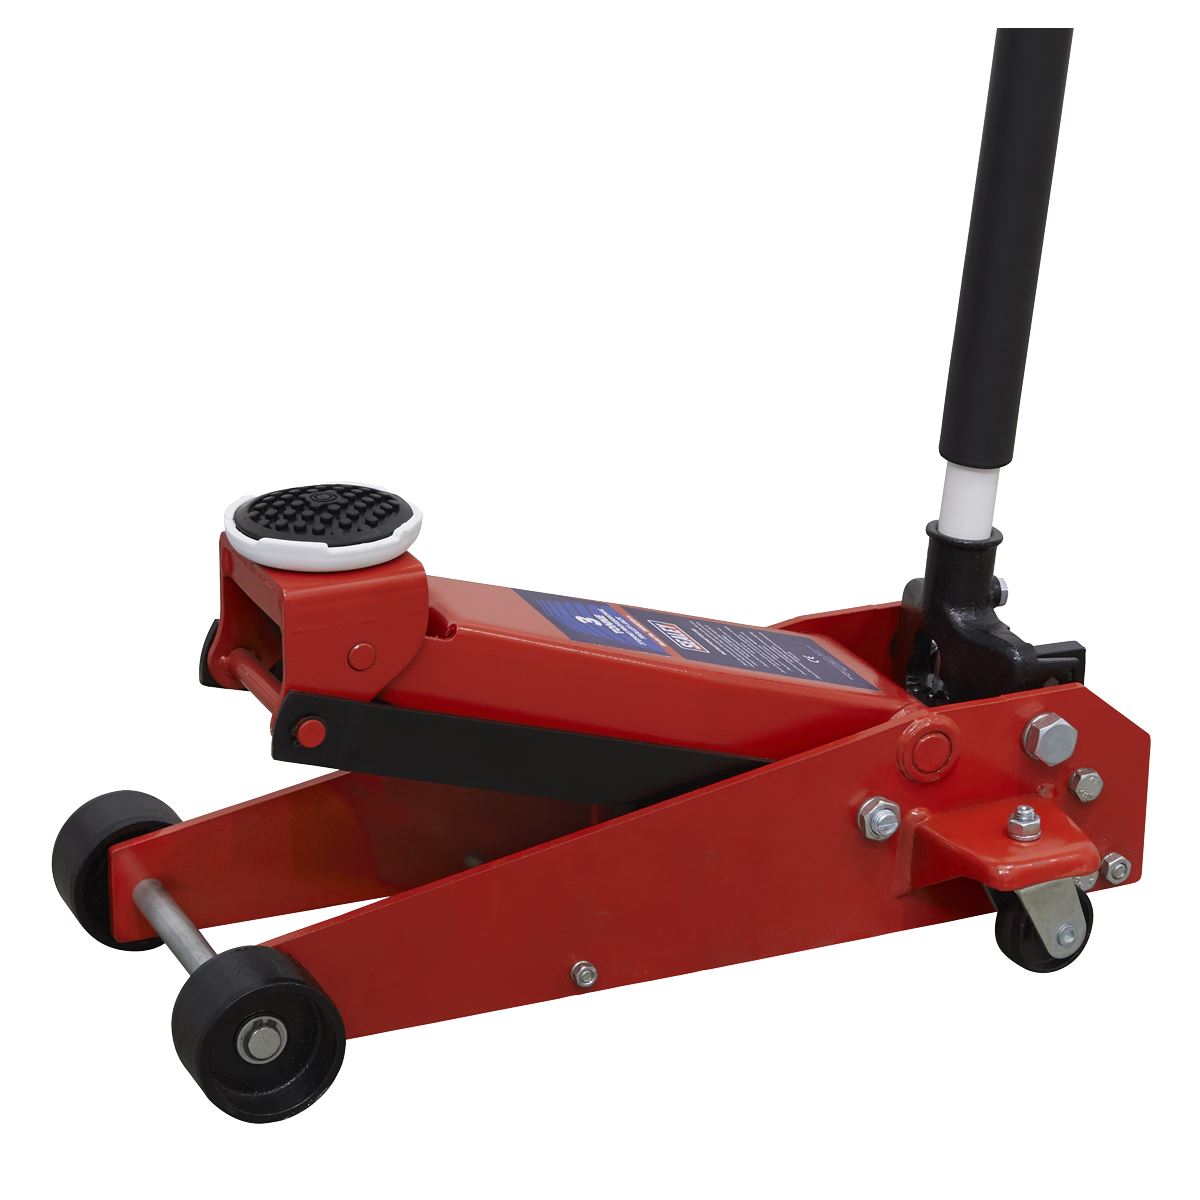 Sealey Standard Chassis Trolley Jack 3 Tonne